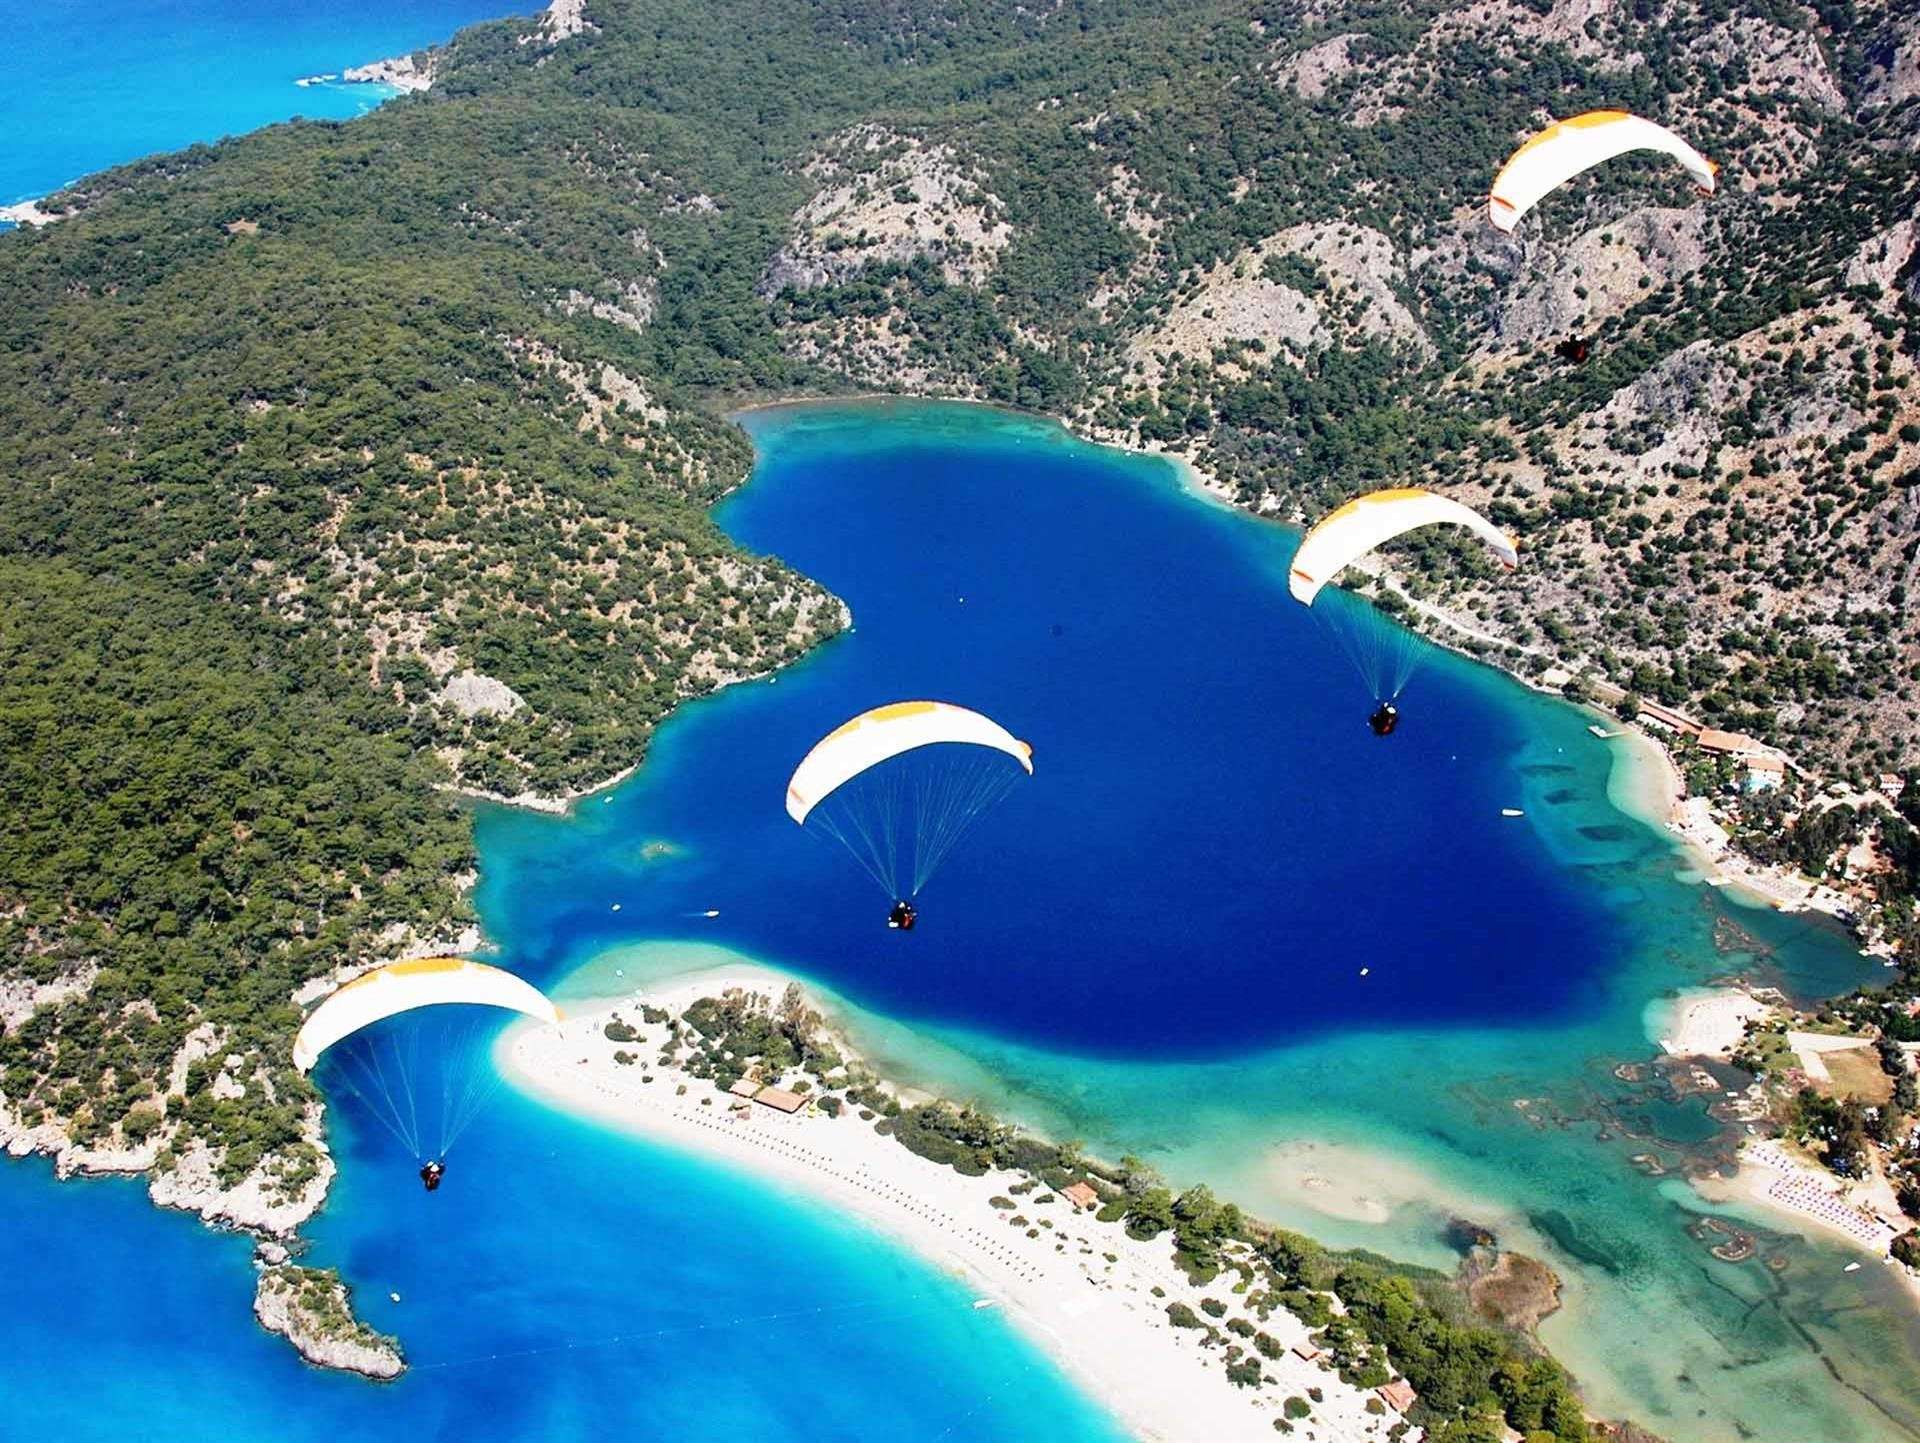  There are no more picturesque places! Mugla Province - the most beautiful nature of Turkey